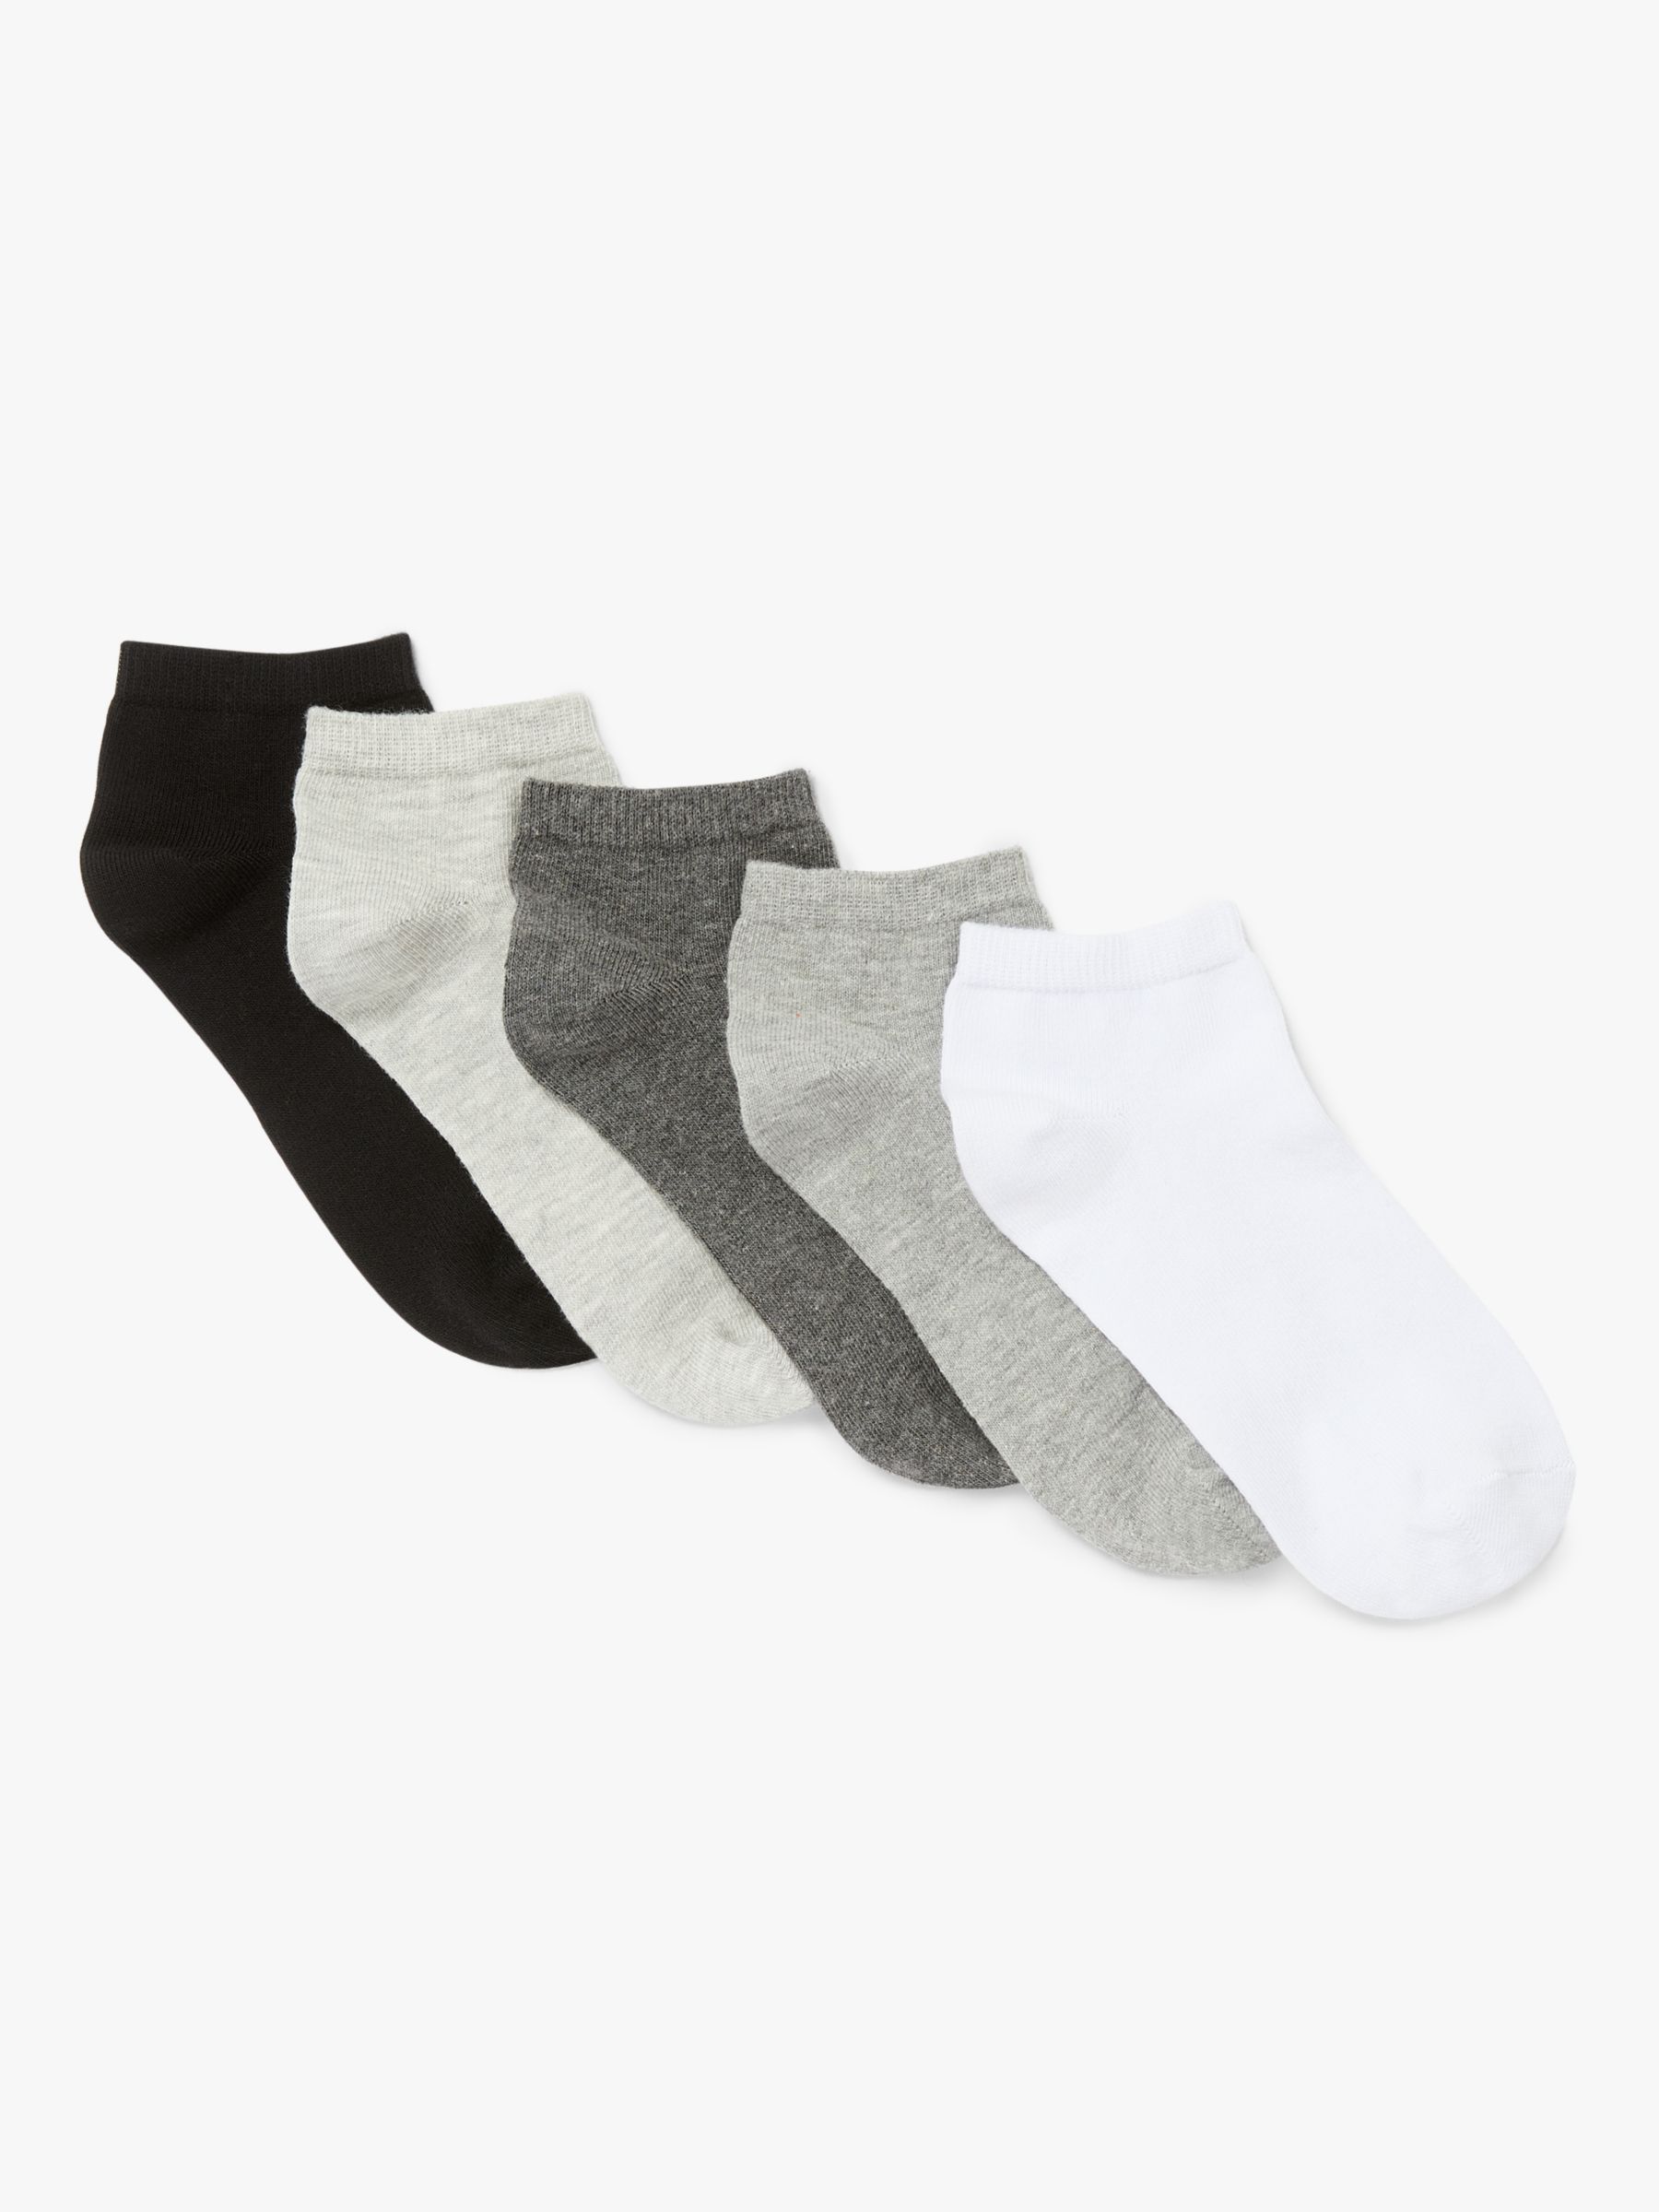 John Lewis ANYDAY Women's Cotton Mix Trainer Socks, Pack of 5, Grey/Multi